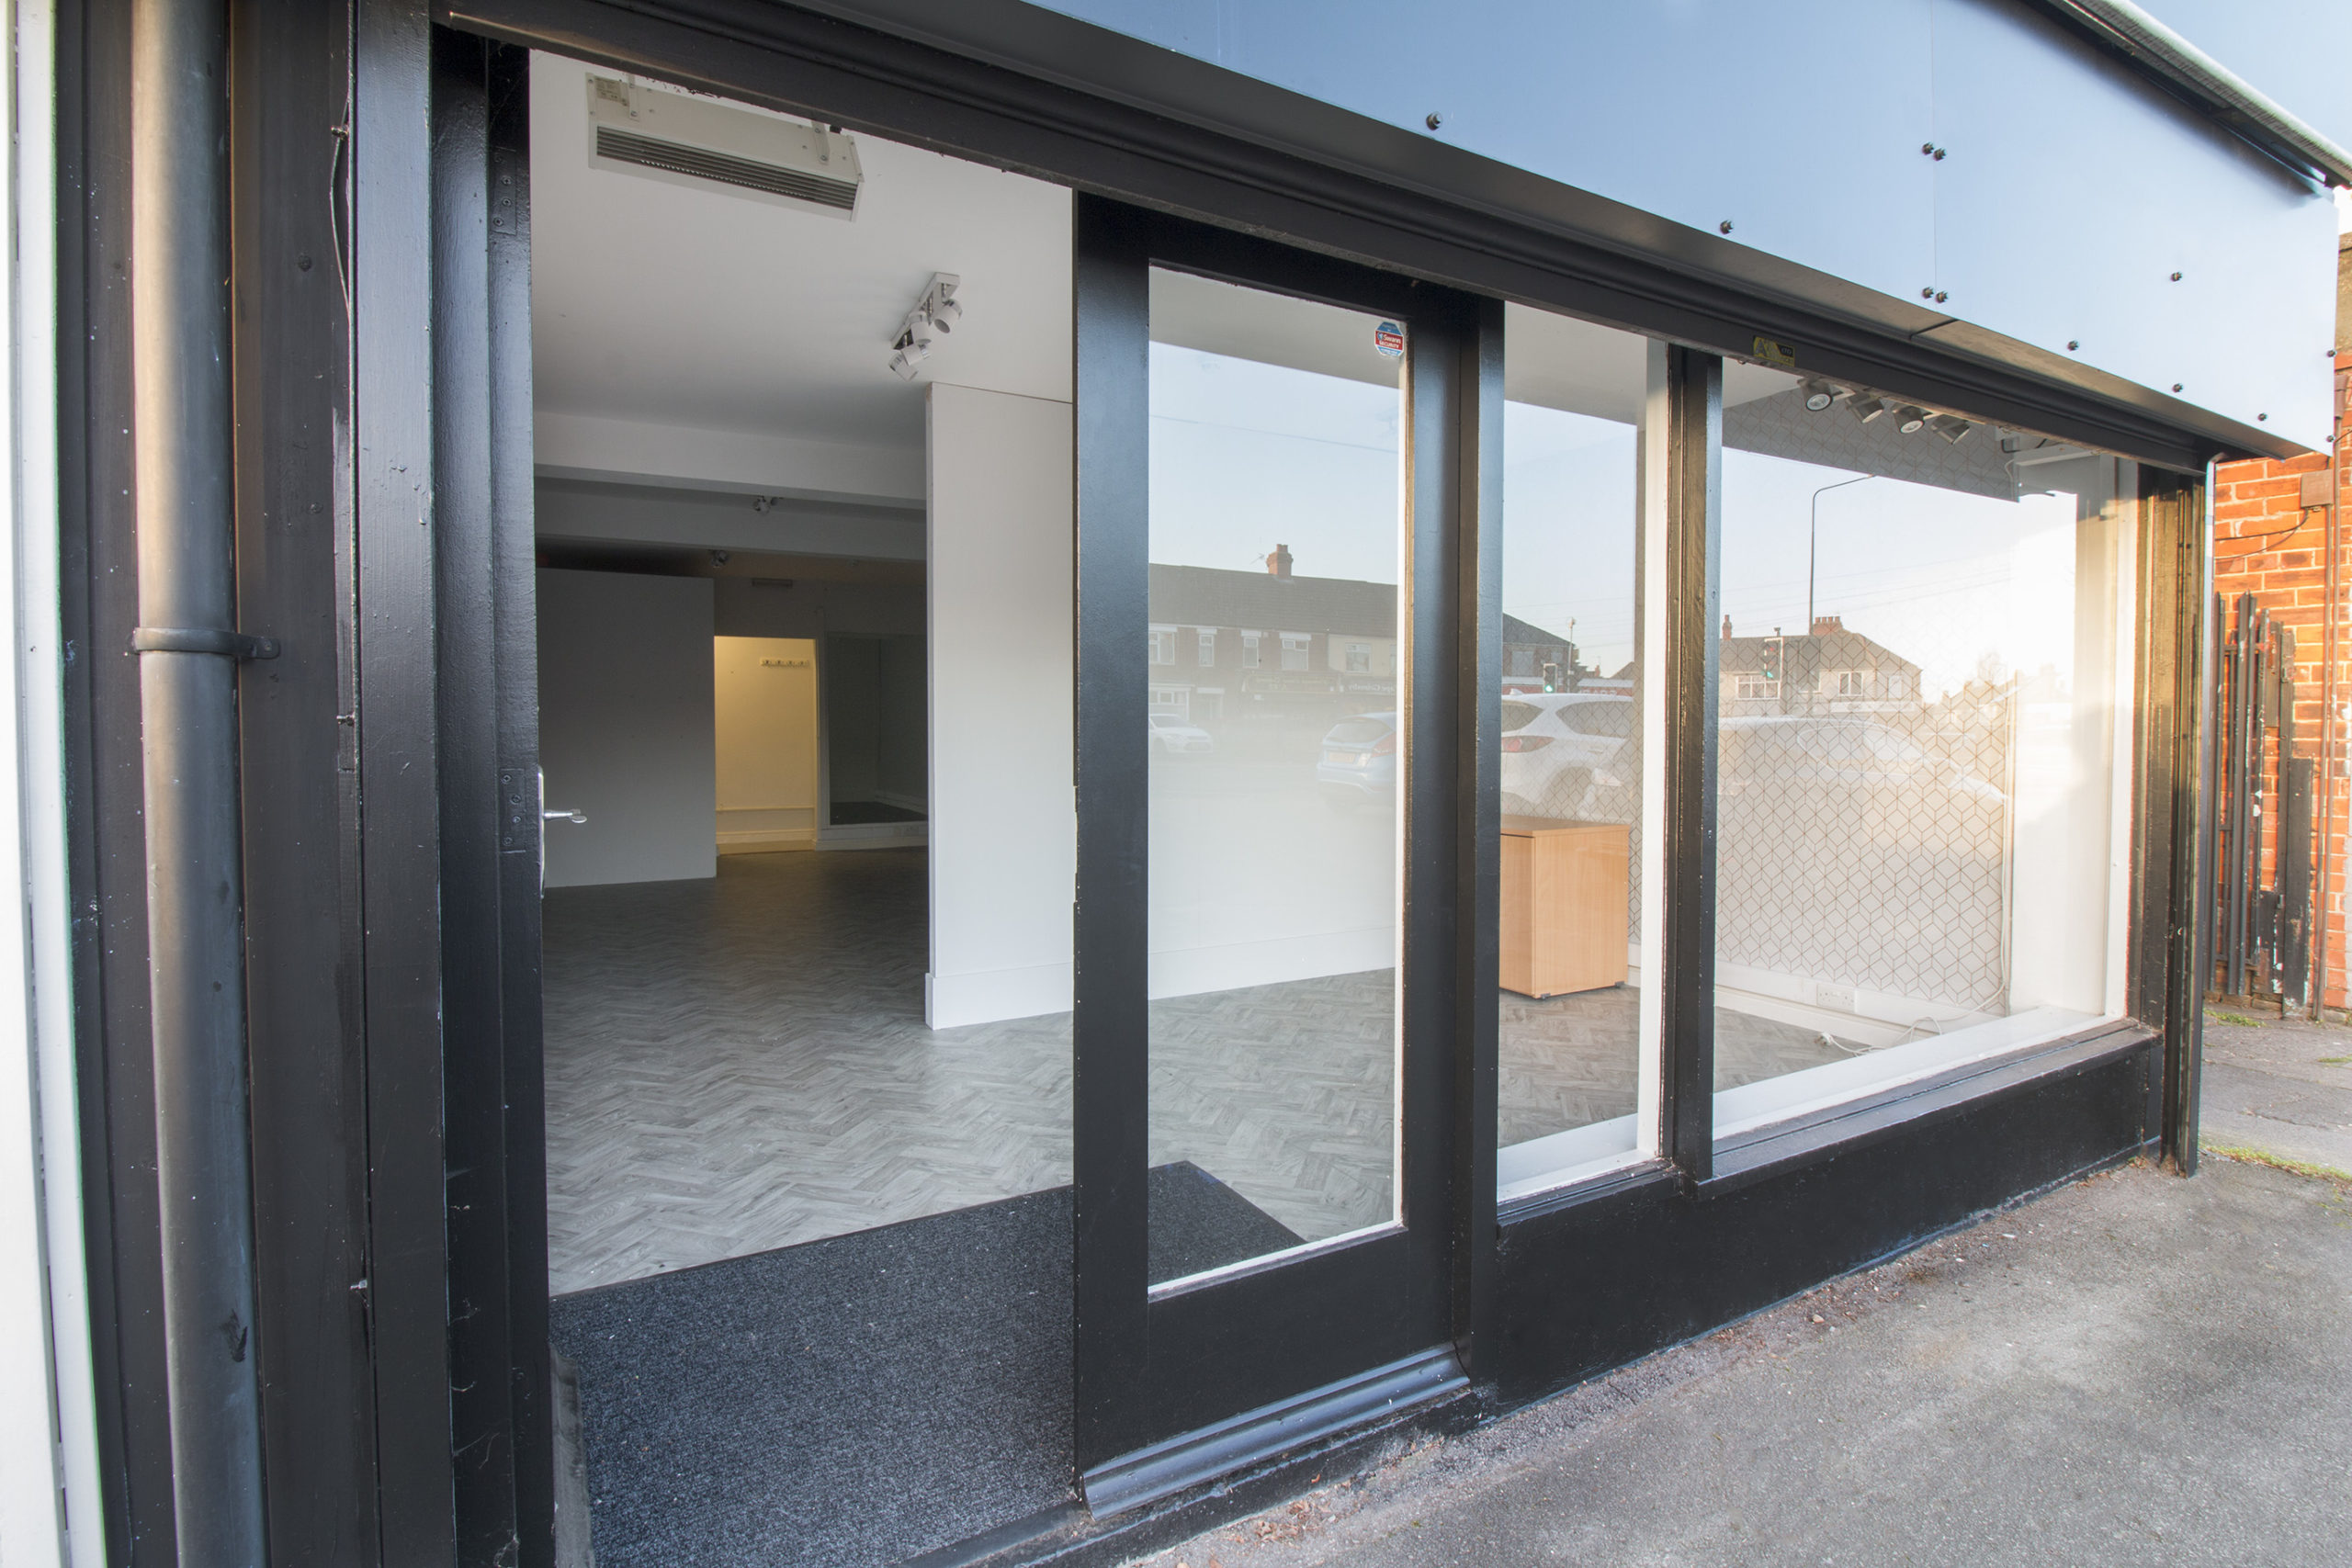 Retail unit with glass and black doors at 170 Yarbrough Road in Grimsby.